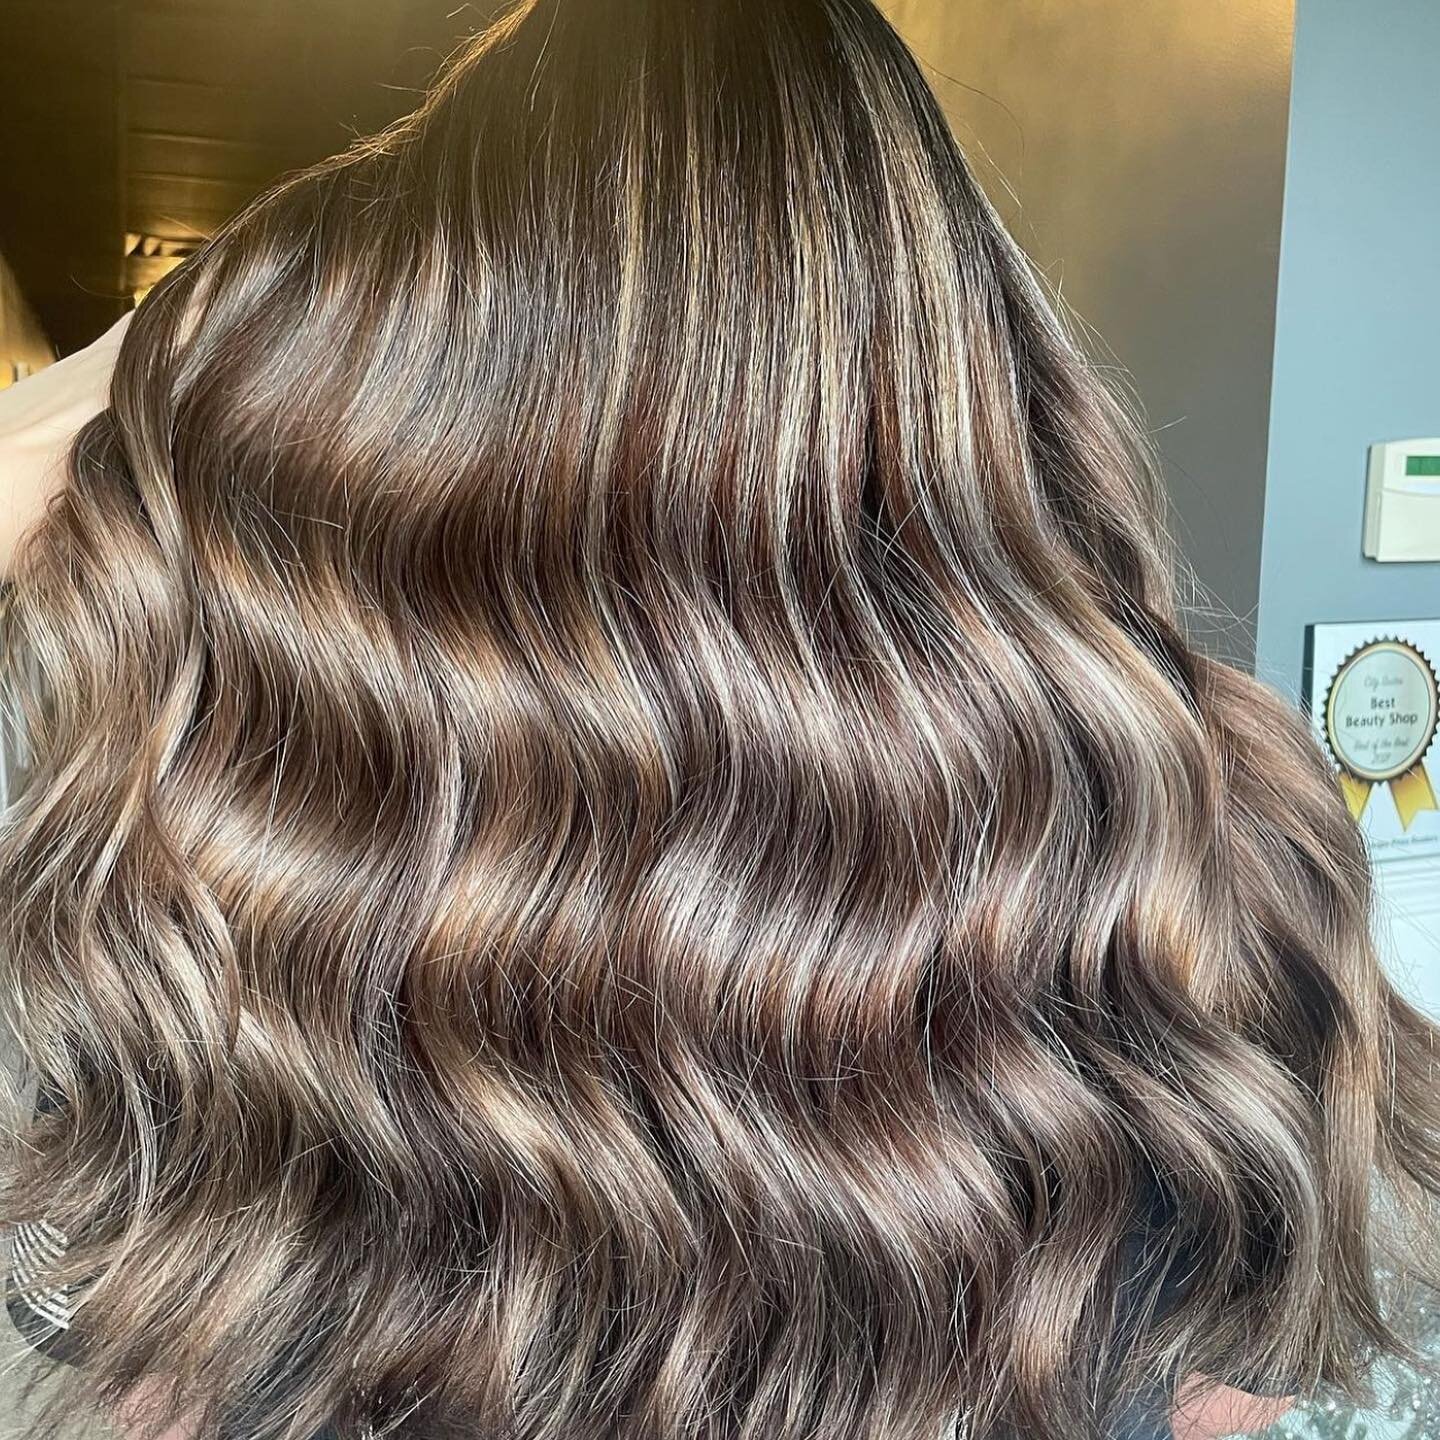 ✨Some gorgeous work from some of our talented suite owners this week! 

#citysuitessalonandspas #salonsuites #salonsuite #owosso #salonsuitesmichigan #salonsuitesowosso #michiganhair